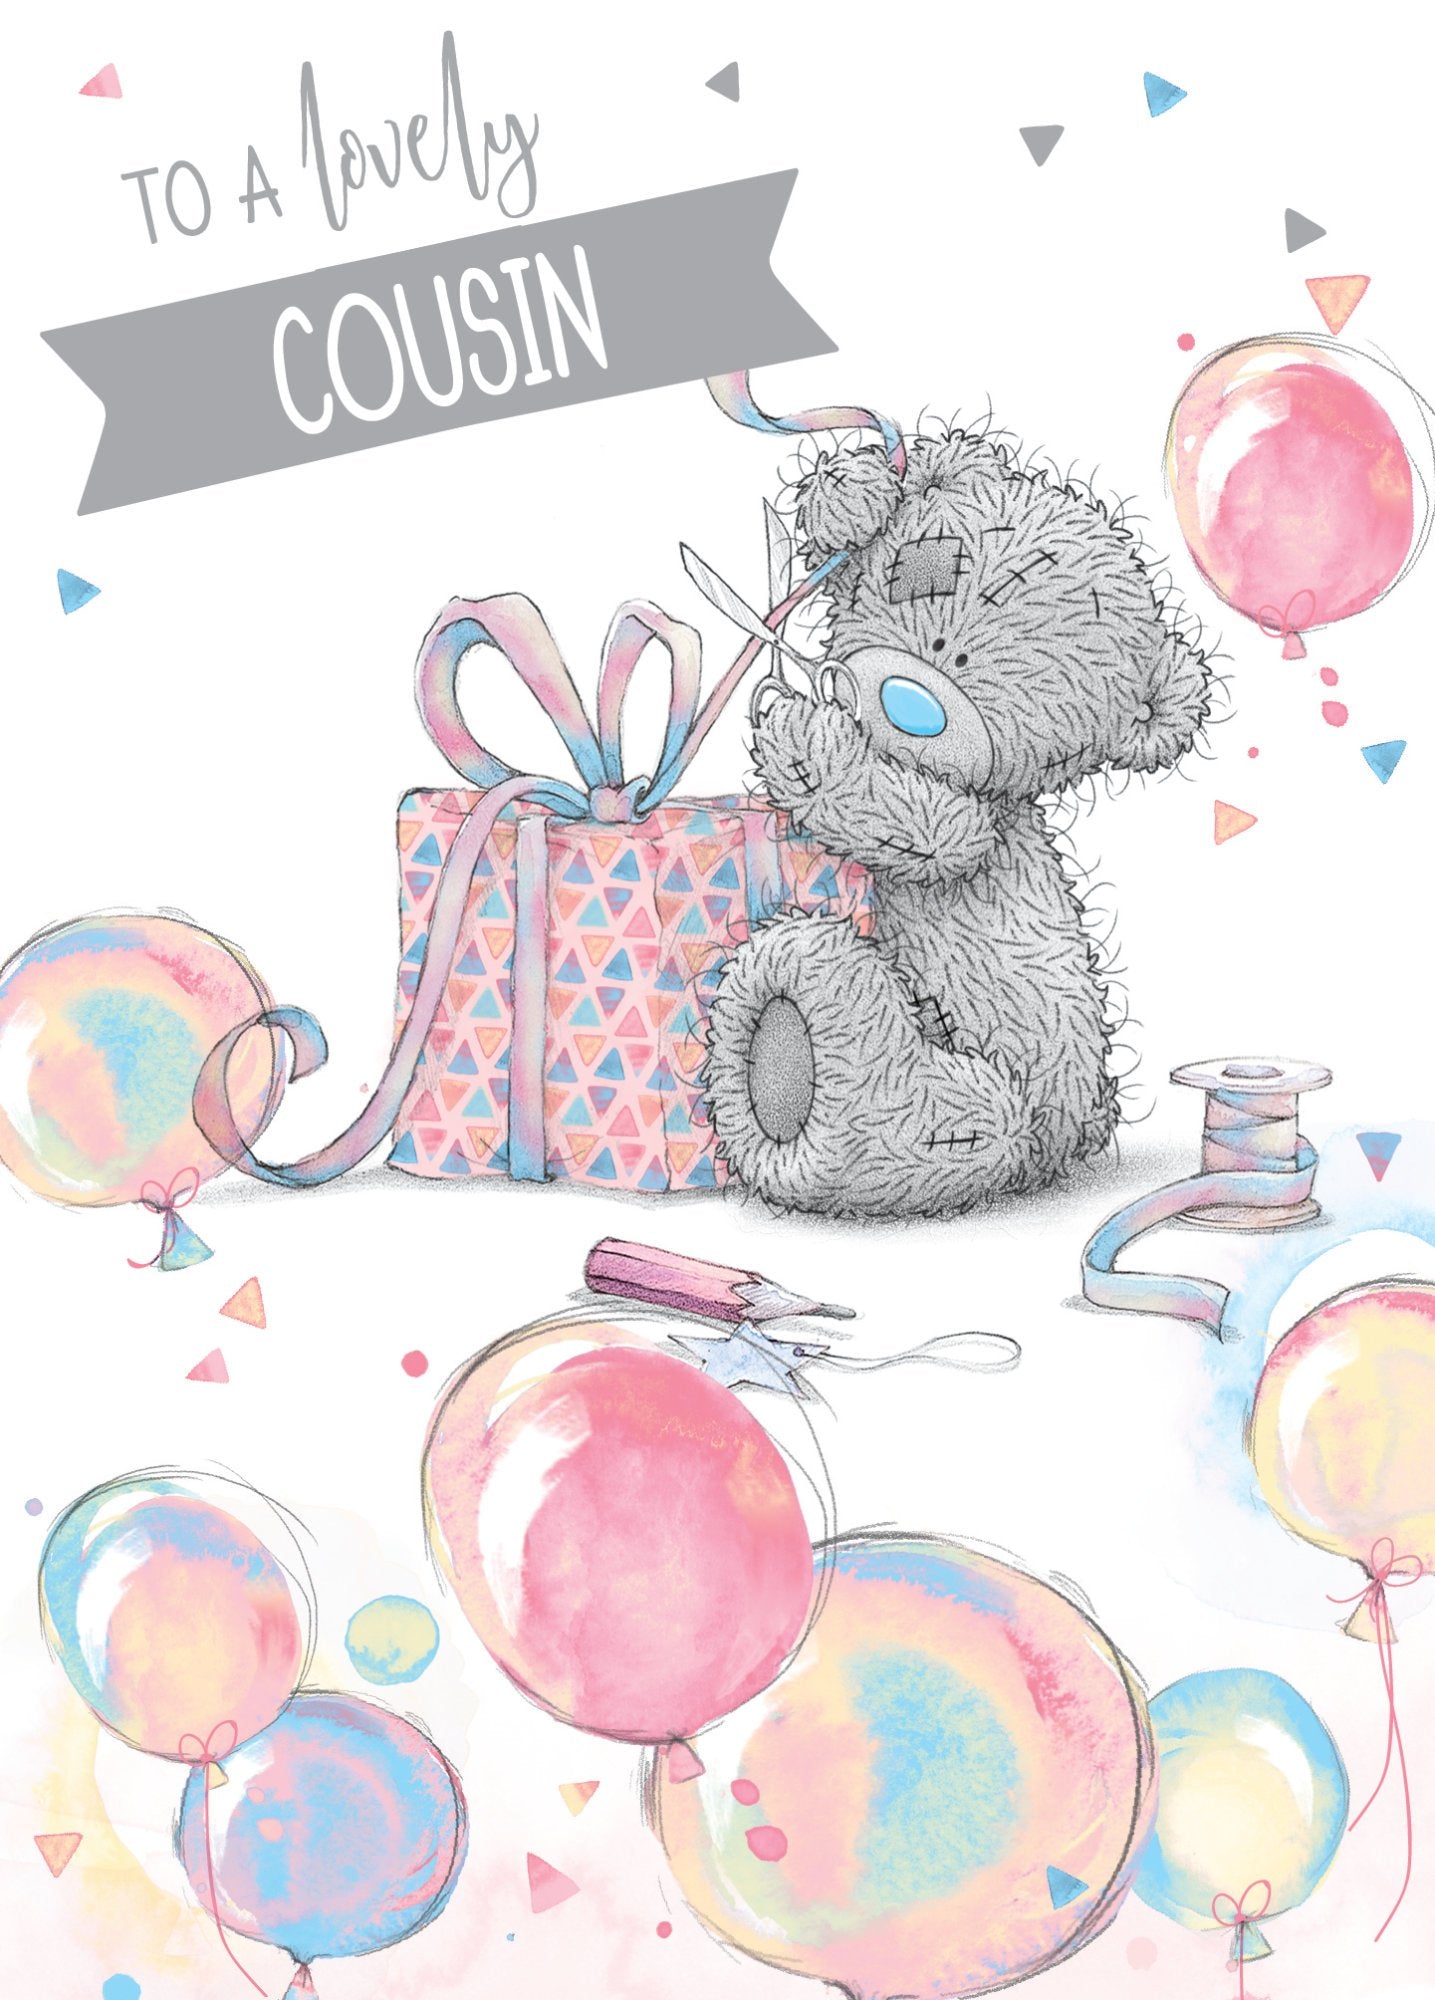 Photograph of Cousin Birthday Teddy Box Greetings Card at Nicole's Shop